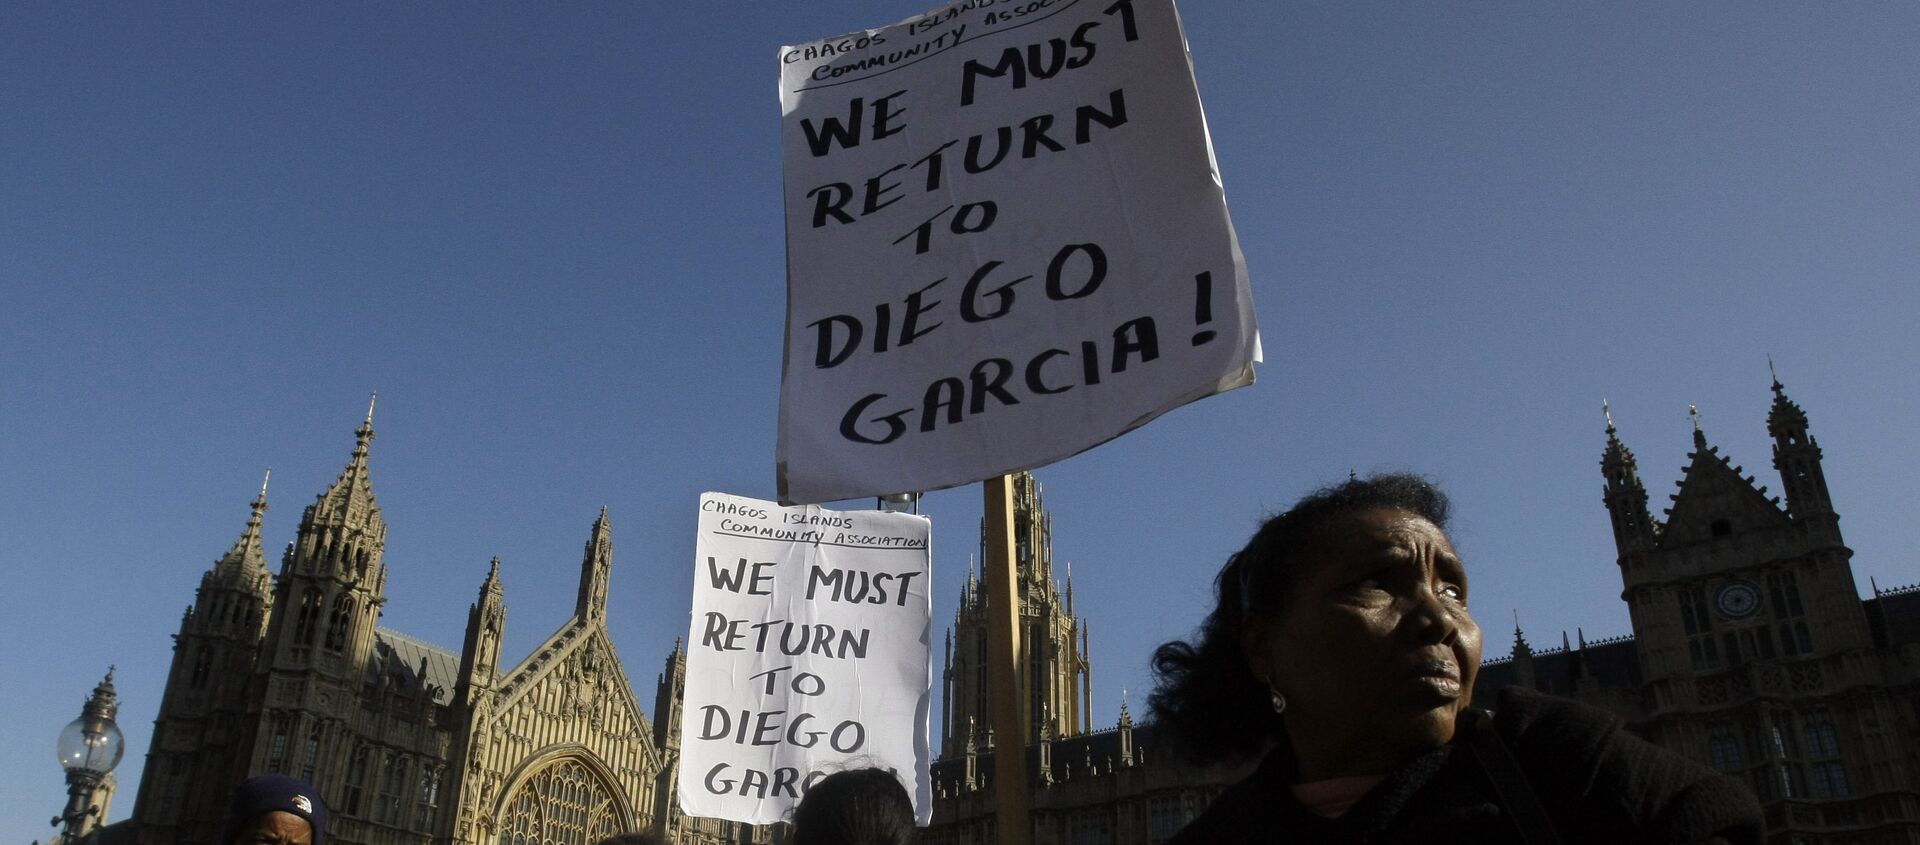 A protest outside the Houses of Parliament in London, after a court ruling decided Chagos Islanders are not allowed to return to their homeland - Sputnik International, 1920, 22.05.2019